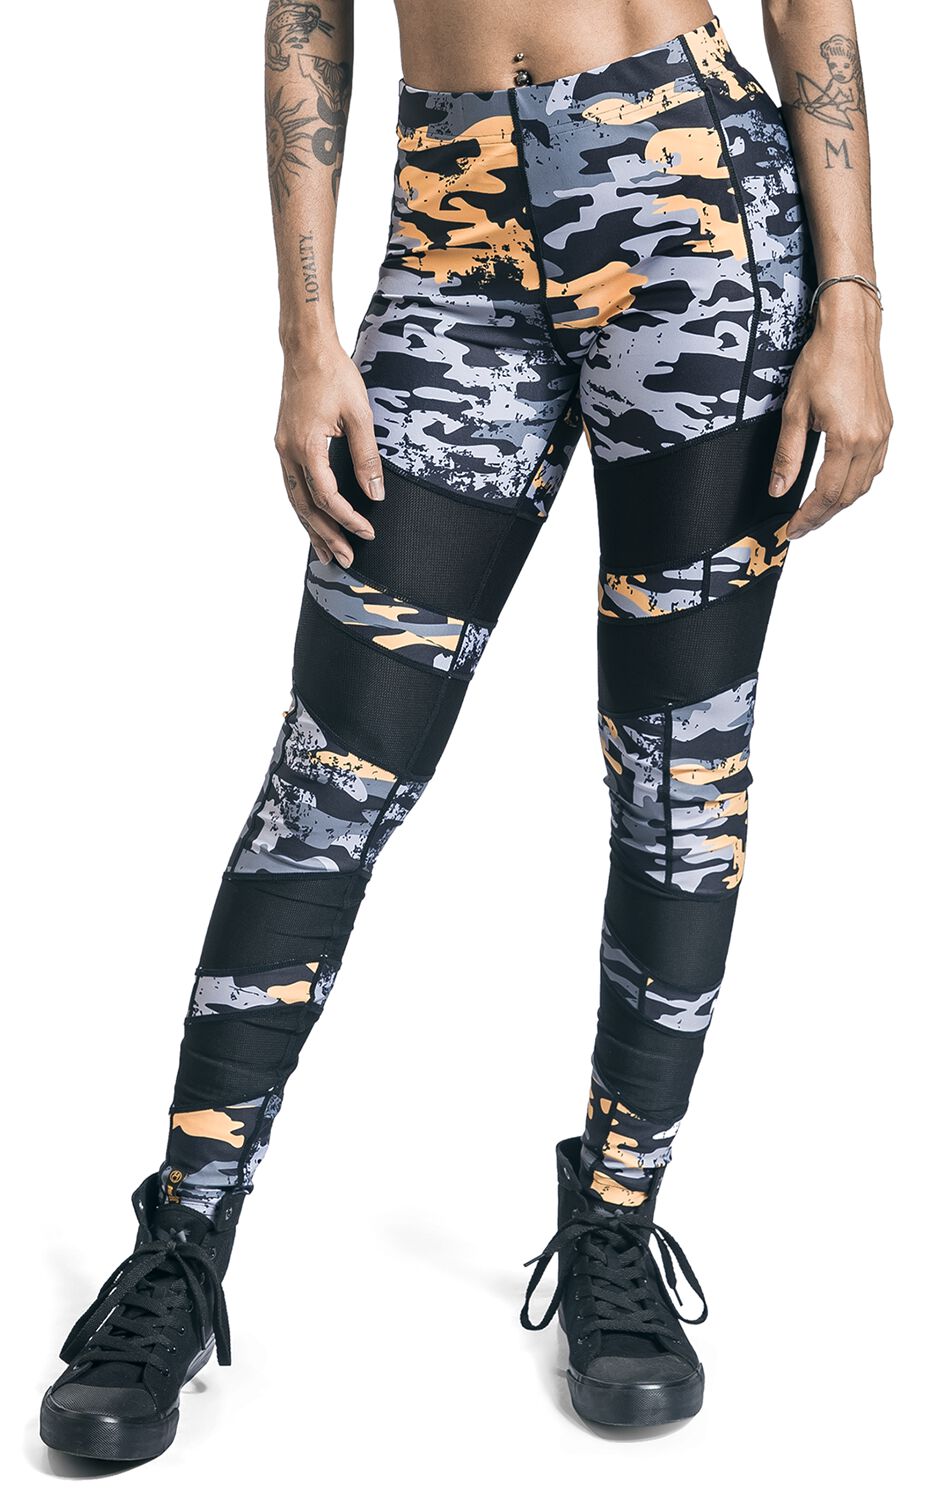 betreuren Gehoorzaam Cornwall Sport Leggings with All-Over Camouflage Print | EMP Special Collection  Leggings | Large